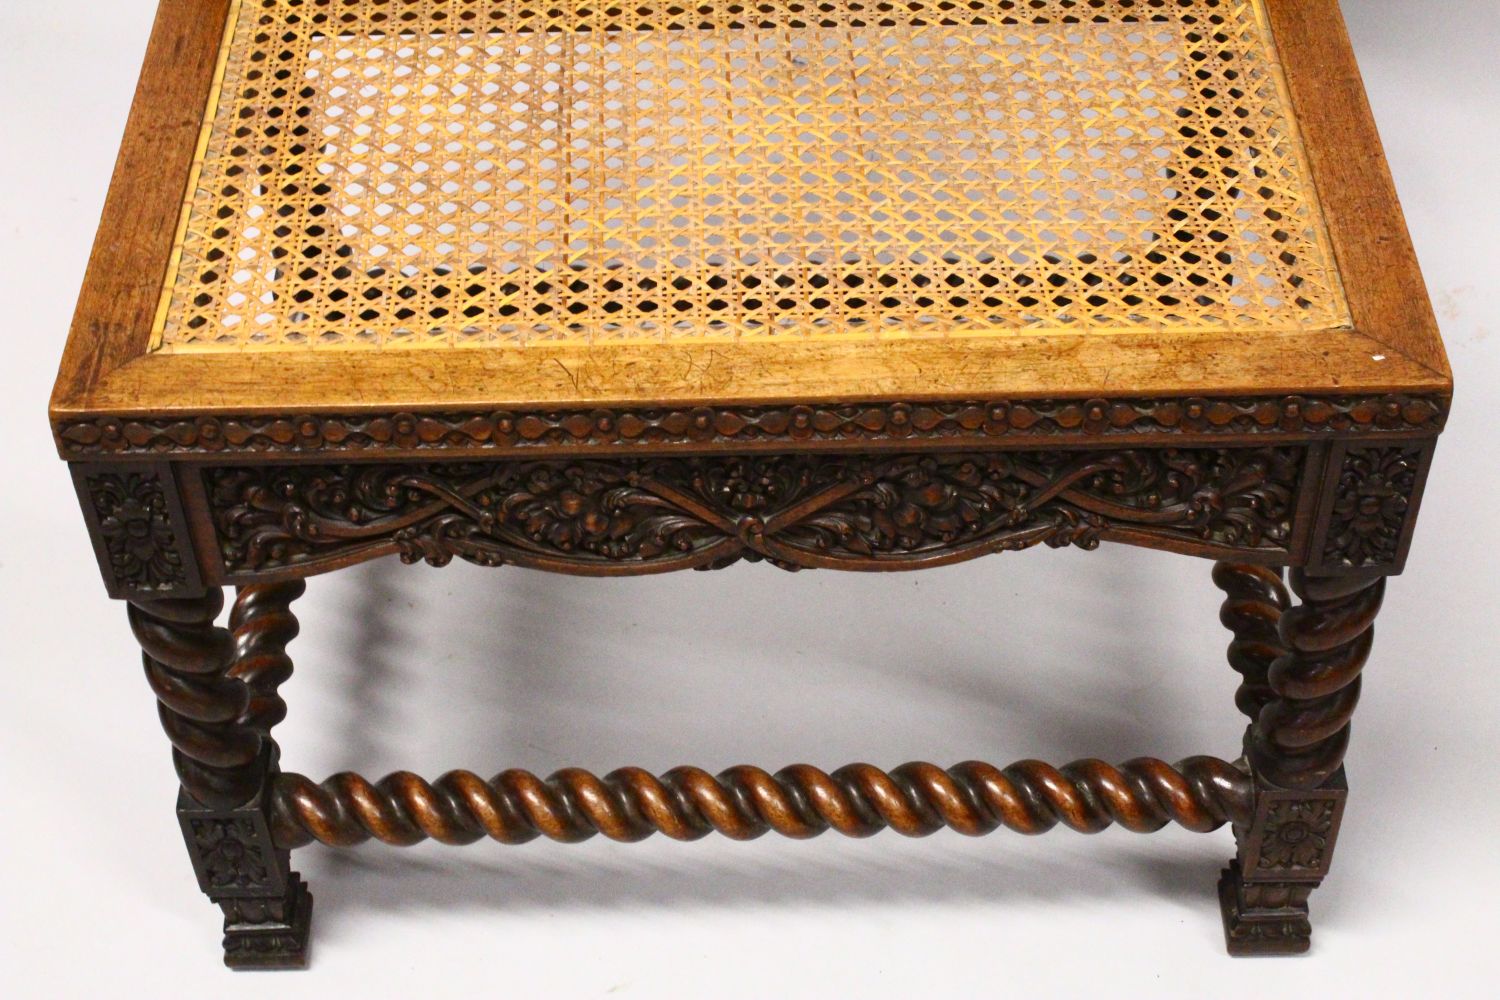 AN 18TH / 19TH CENTURY CEYLONESE CARVED ROSEWOOD CHAIR, with carved panels and wicker woven seat, - Image 4 of 5